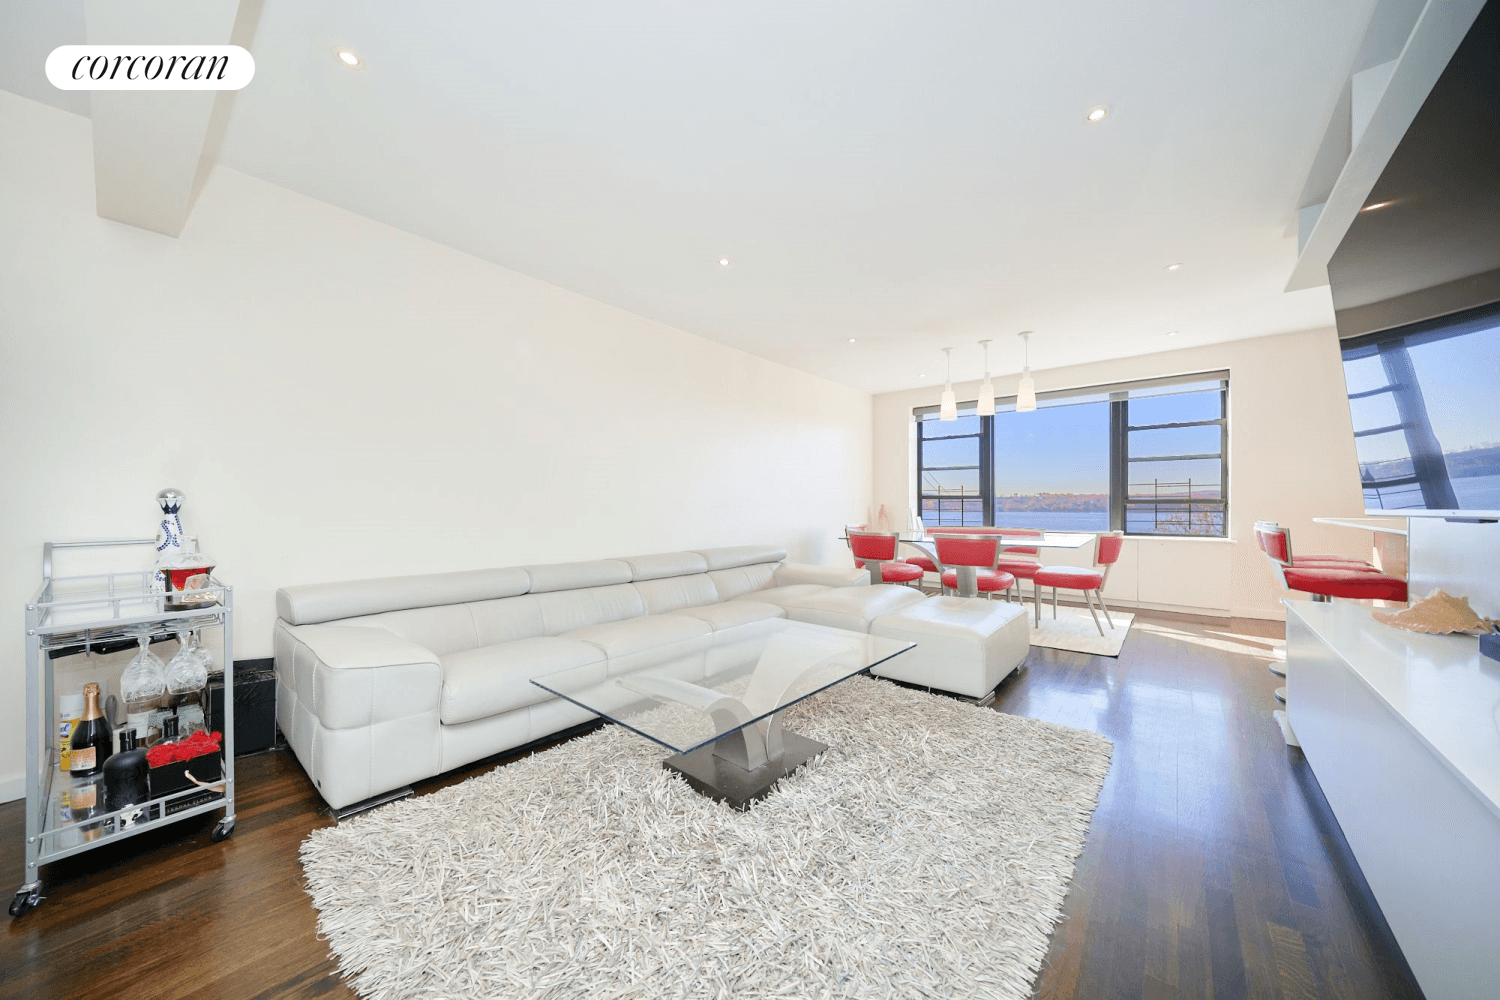 Rarely available large top floor corner 2 bedroom spectacular light and unobstructed views of the Verrazano Bridge Narrows Waterway included.